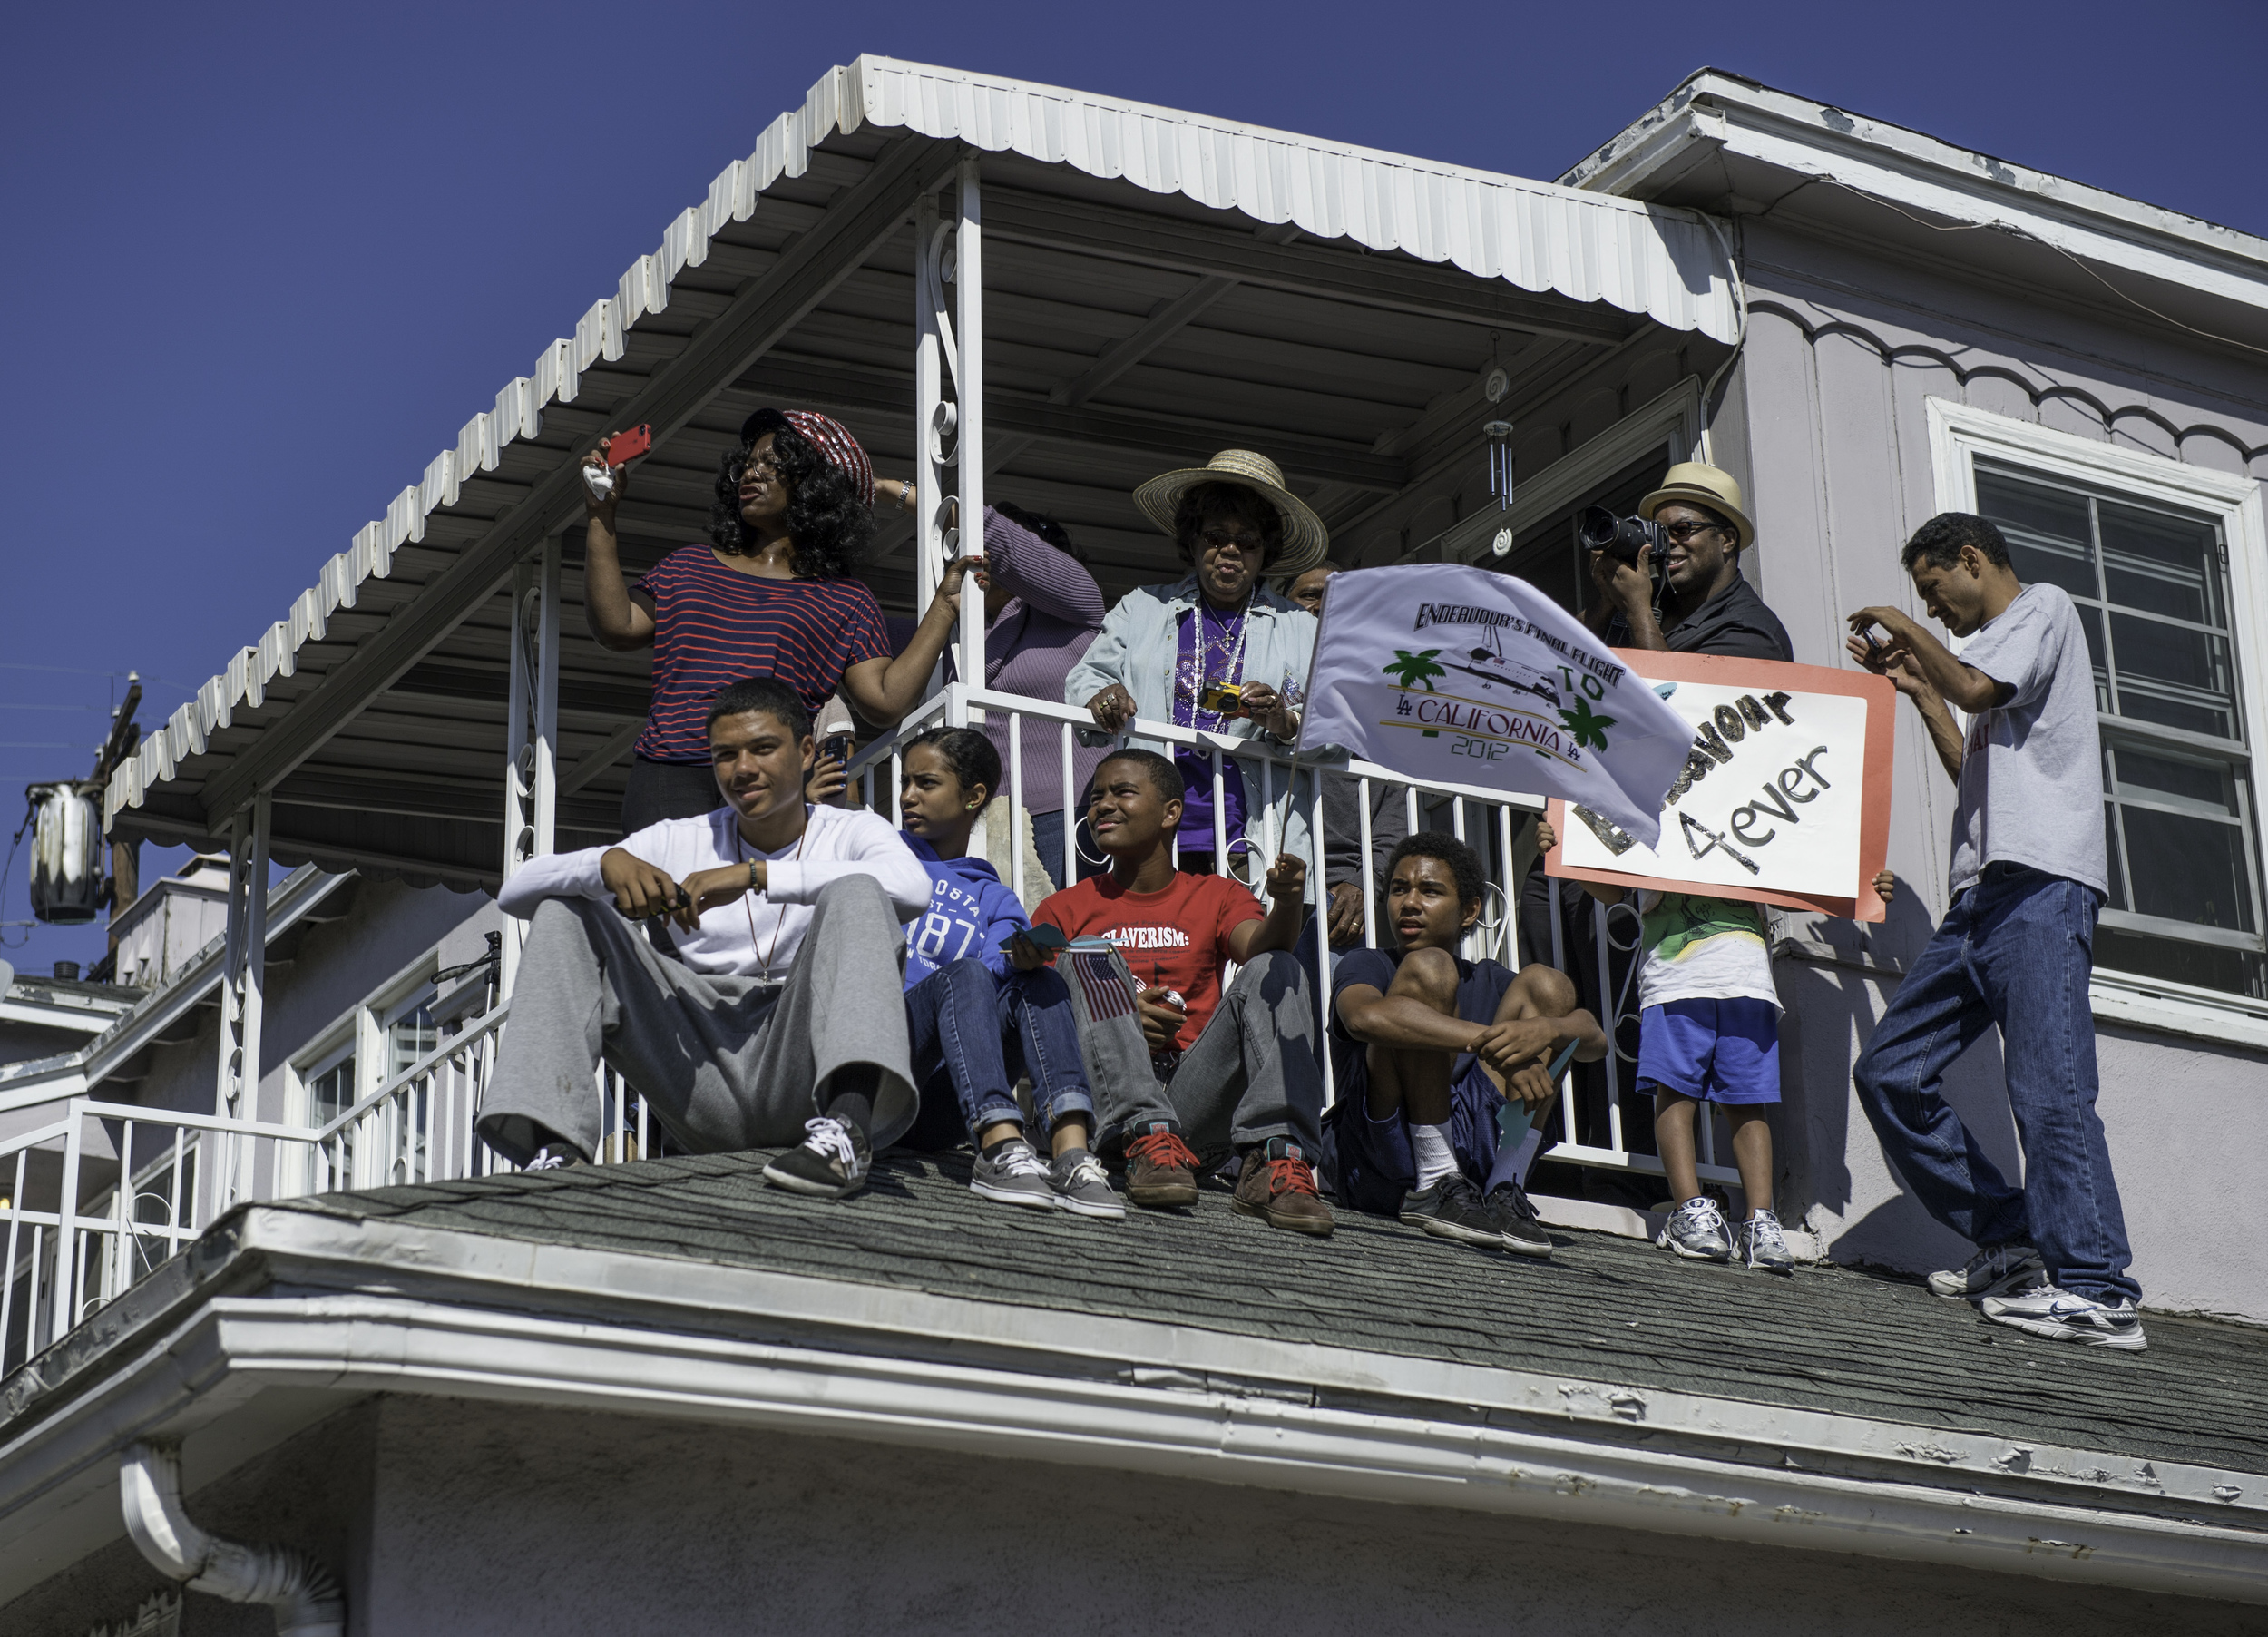  People gather as space shuttle Endeavour passes through their neighborhood in Inglewood, CA on Saturday, Oct. 13, 2012. Endeavour, built as a replacement for space shuttle Challenger, completed 25 missions, spent 299 days in orbit, and orbited Earth